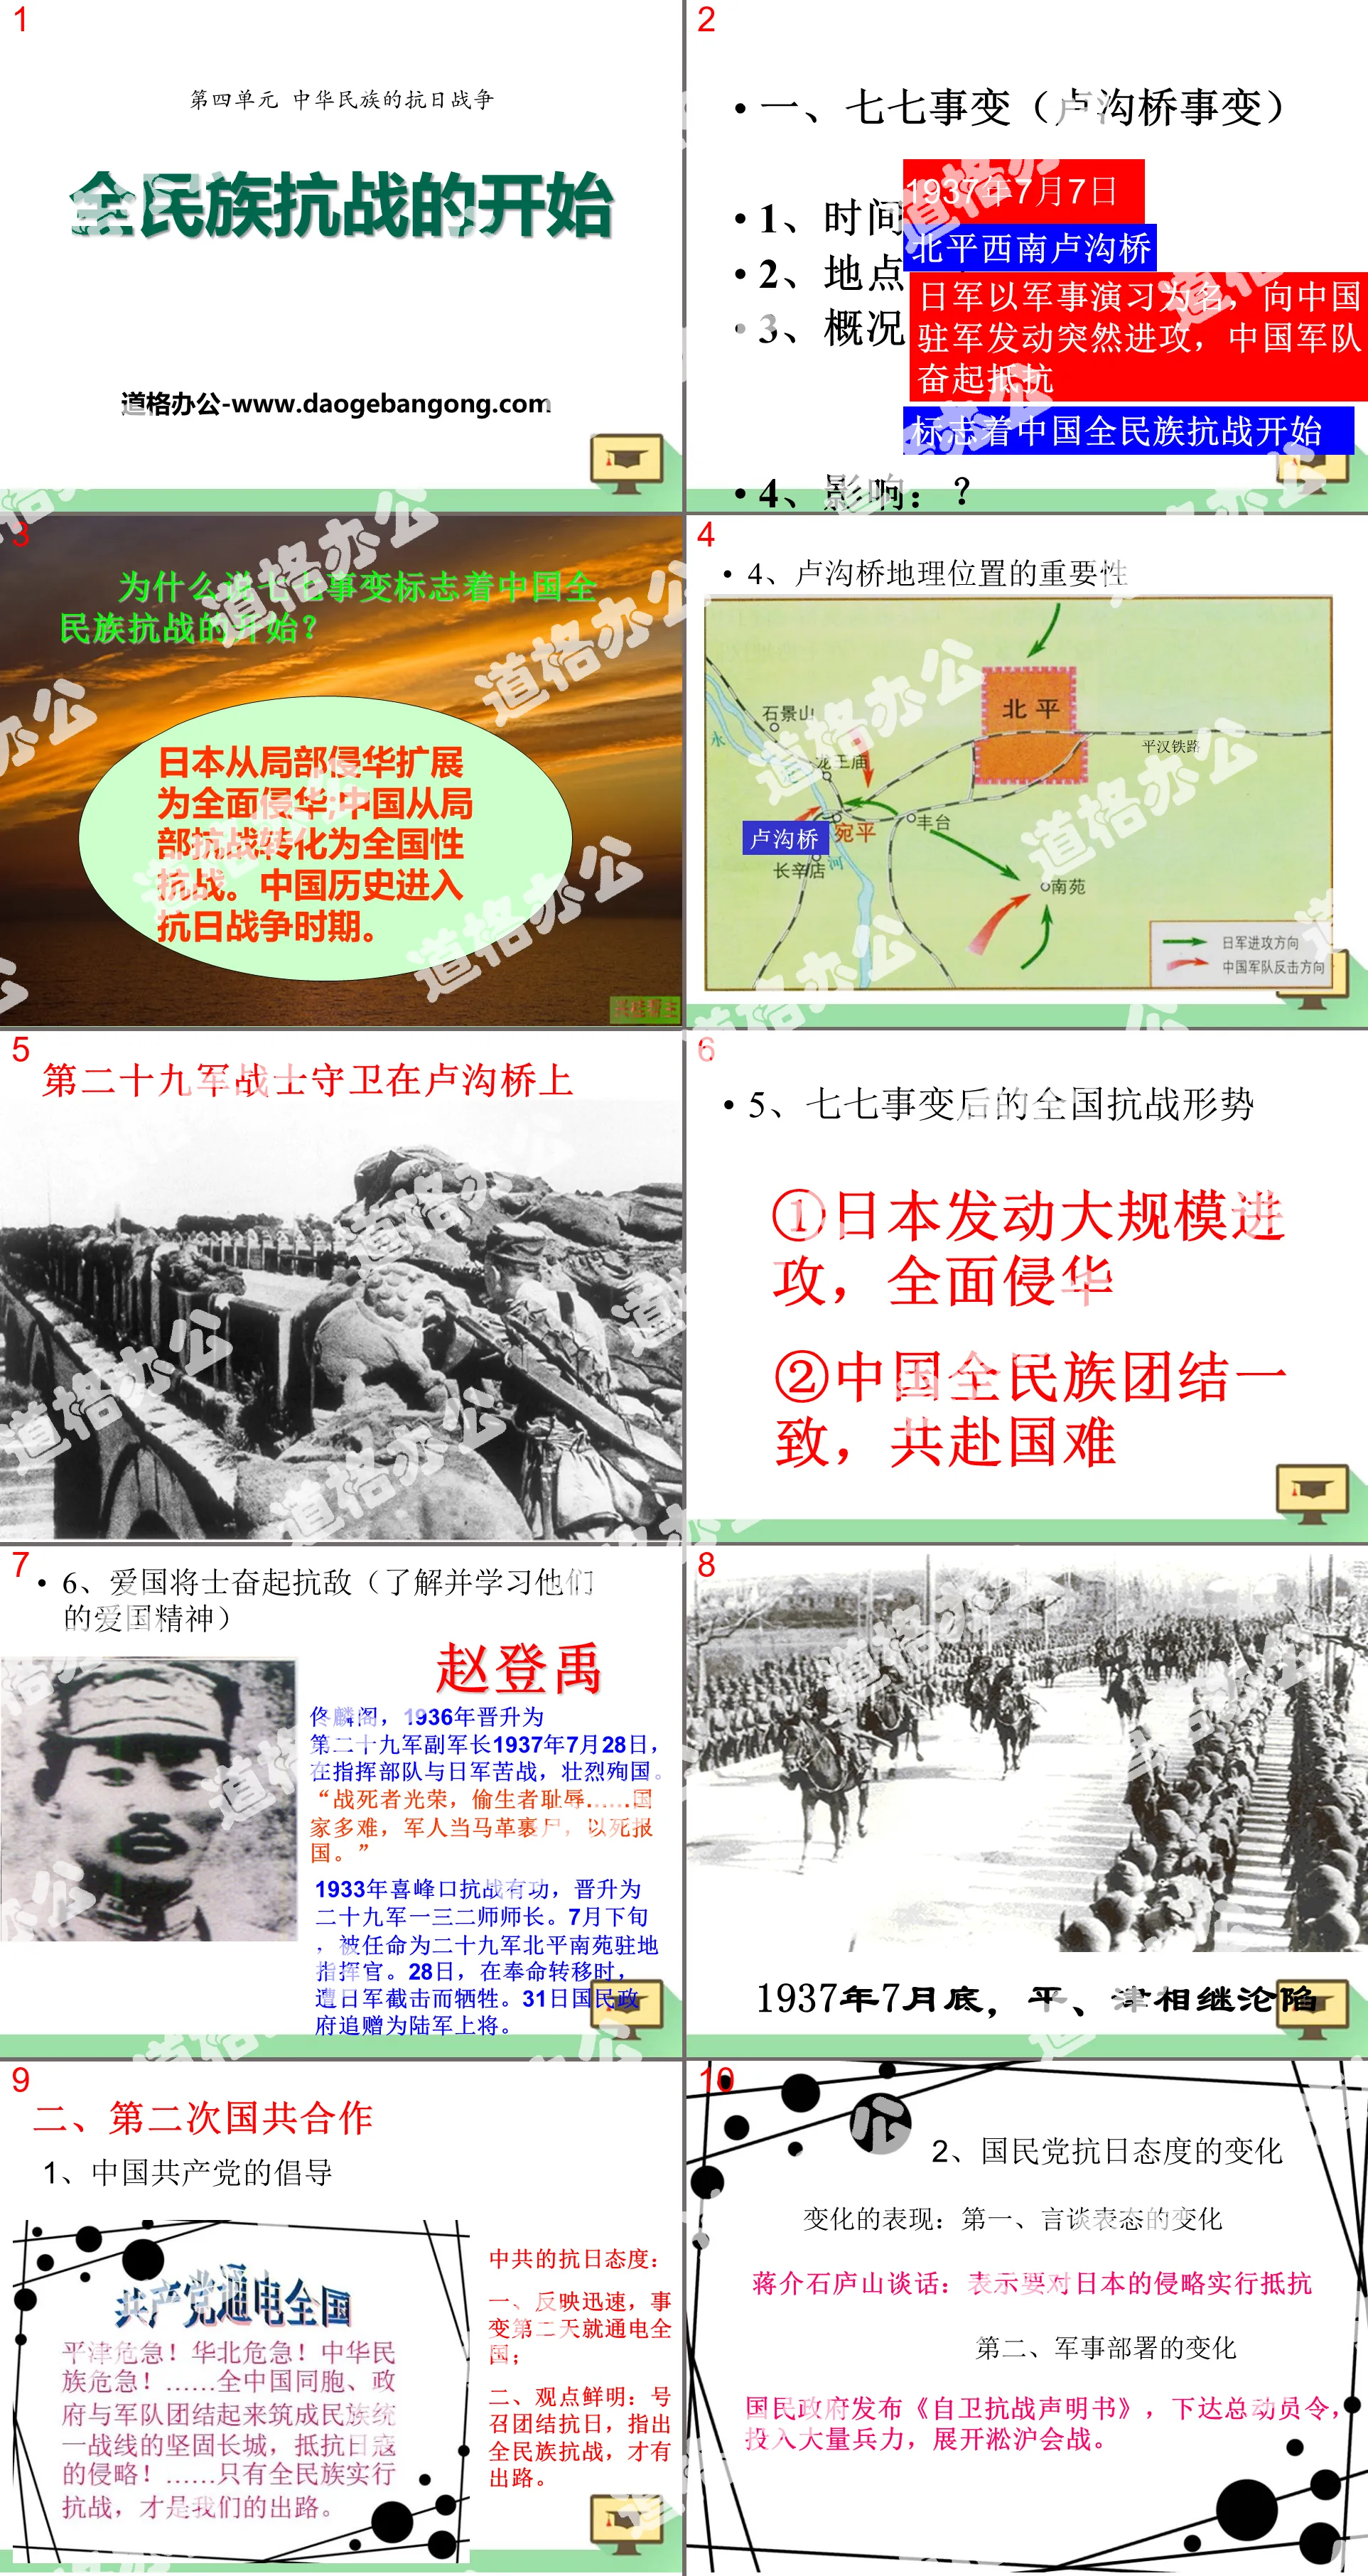 "The Beginning of the Whole Nation's Anti-Japanese War" PPT courseware of the Chinese nation's Anti-Japanese War